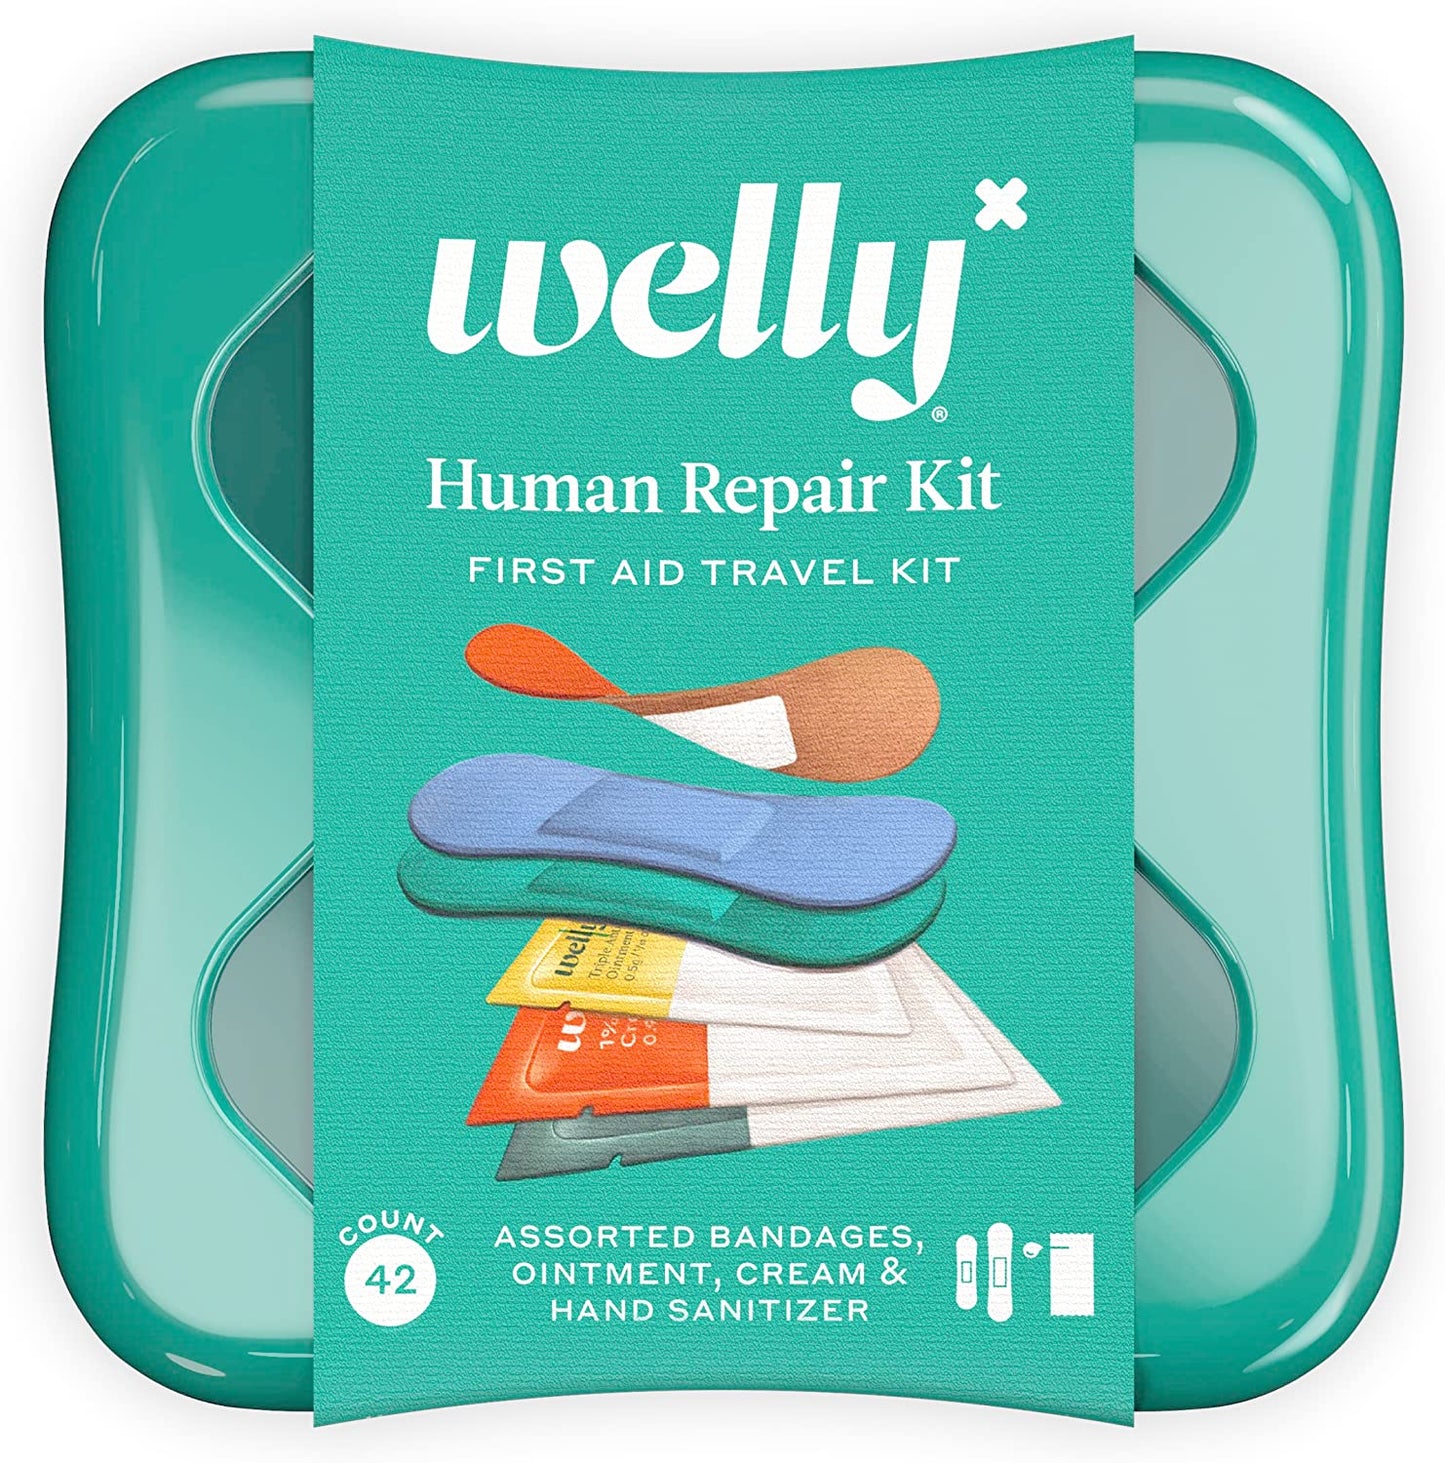 Welly Human Repair Kit First Aid Travel Kit